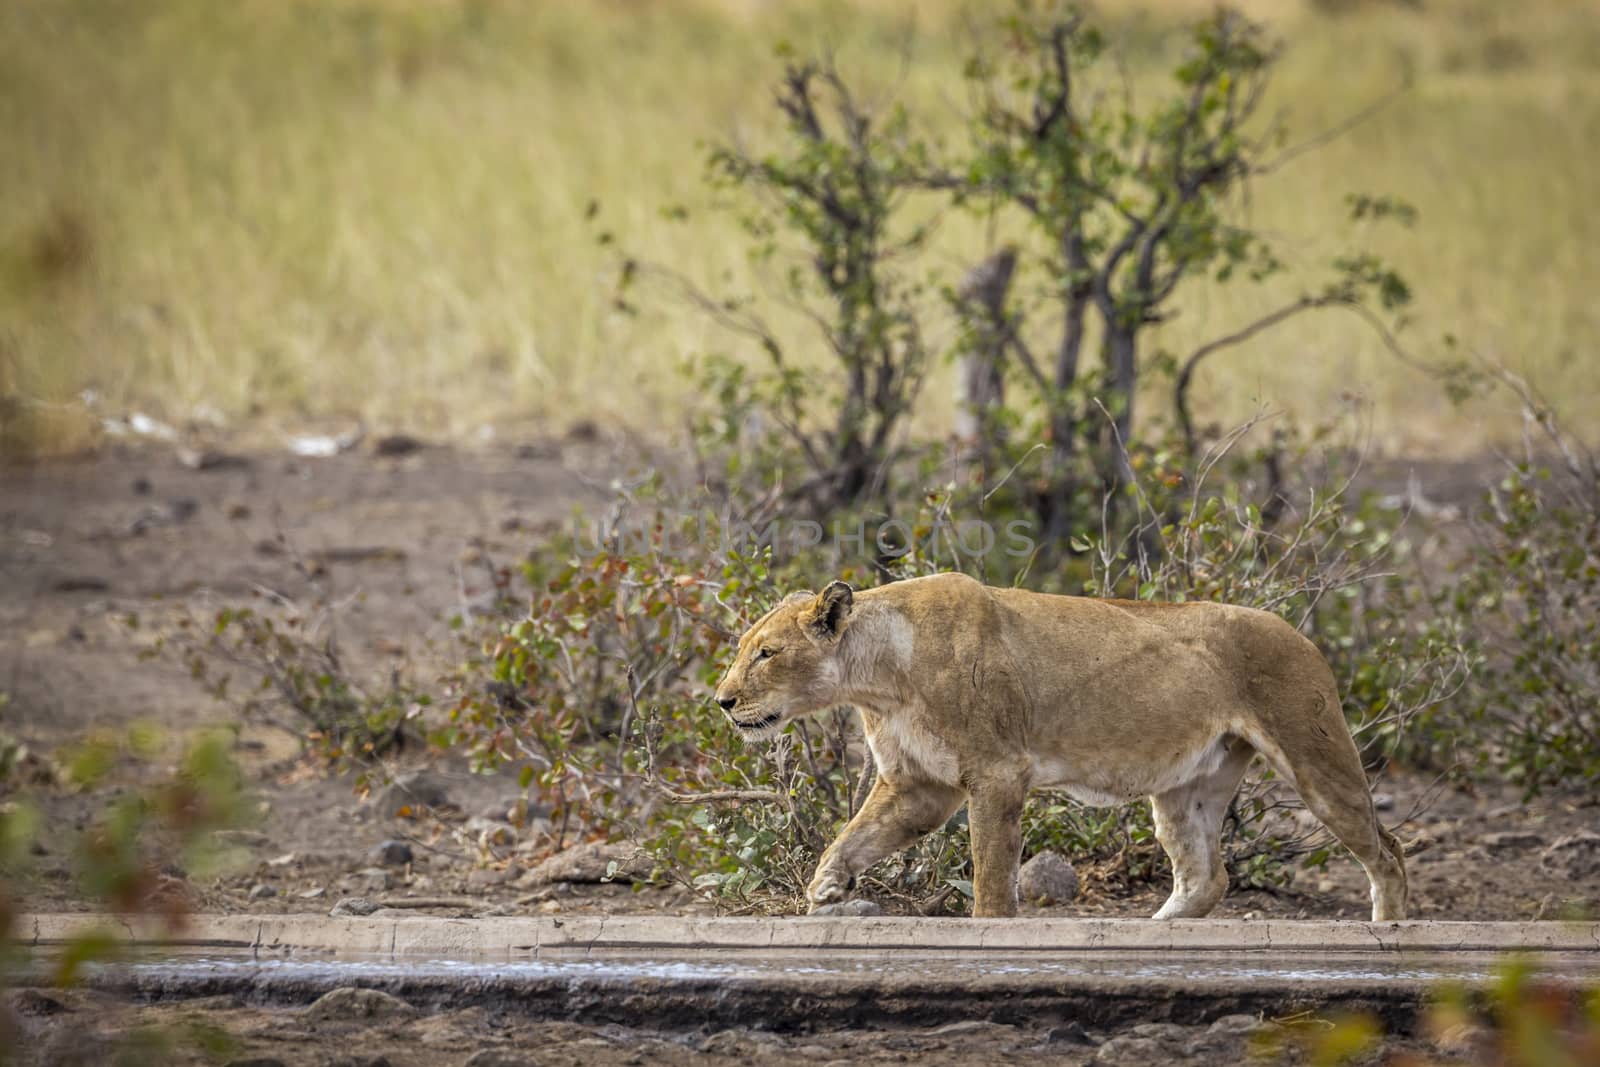 African lioness walking along waterhole in Kruger National park, South Africa ; Specie Panthera leo family of Felidae